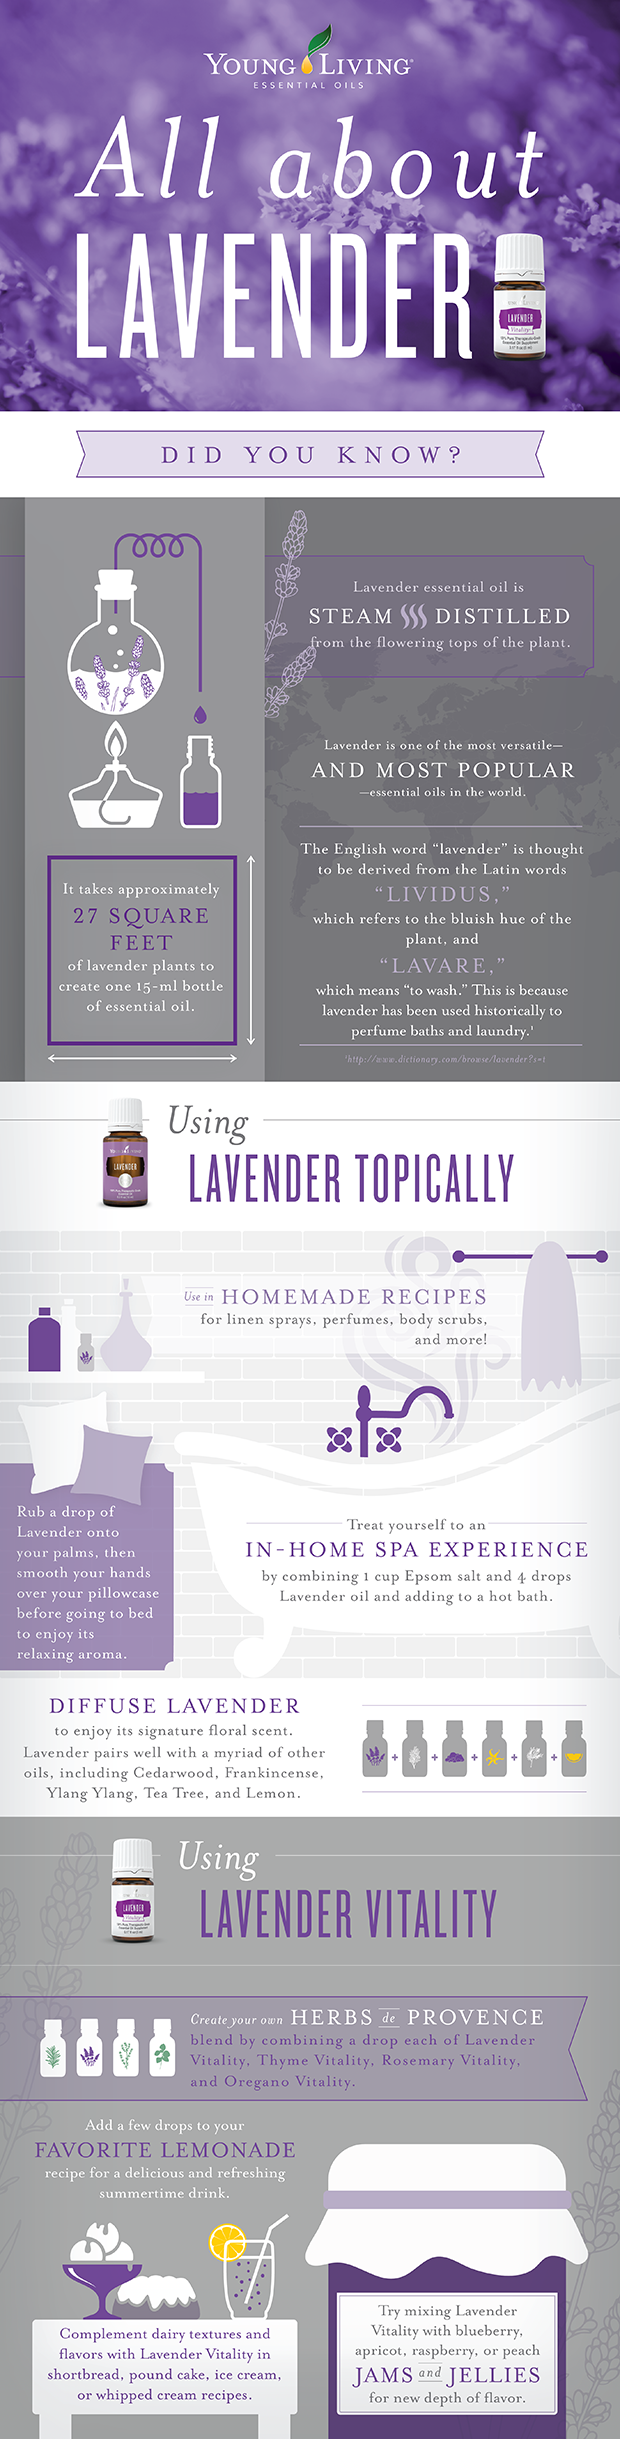 Young Living All About Lavender - Lavender Essential Oil and Lavender Vitality Essential Oil and Uses